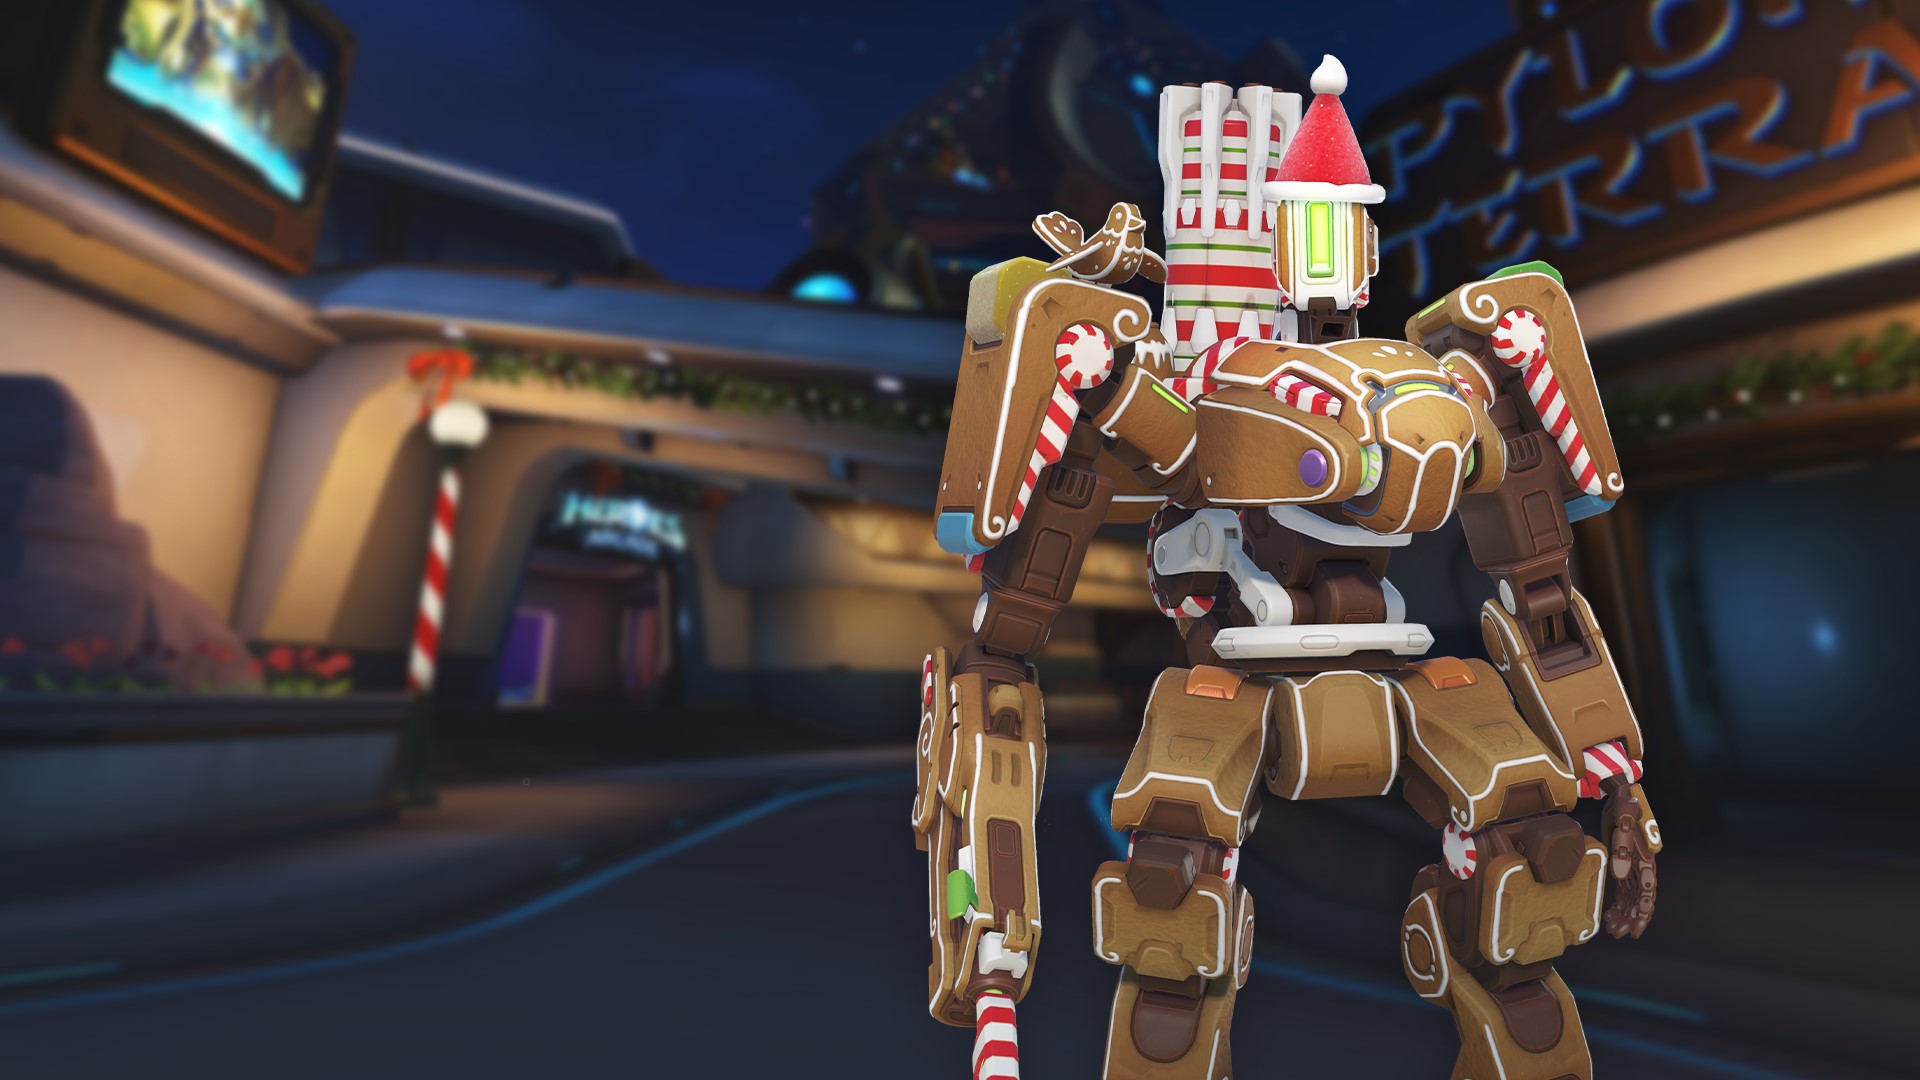 Overwatch 2 Gingerbread Bastion skin can be yours for one coin